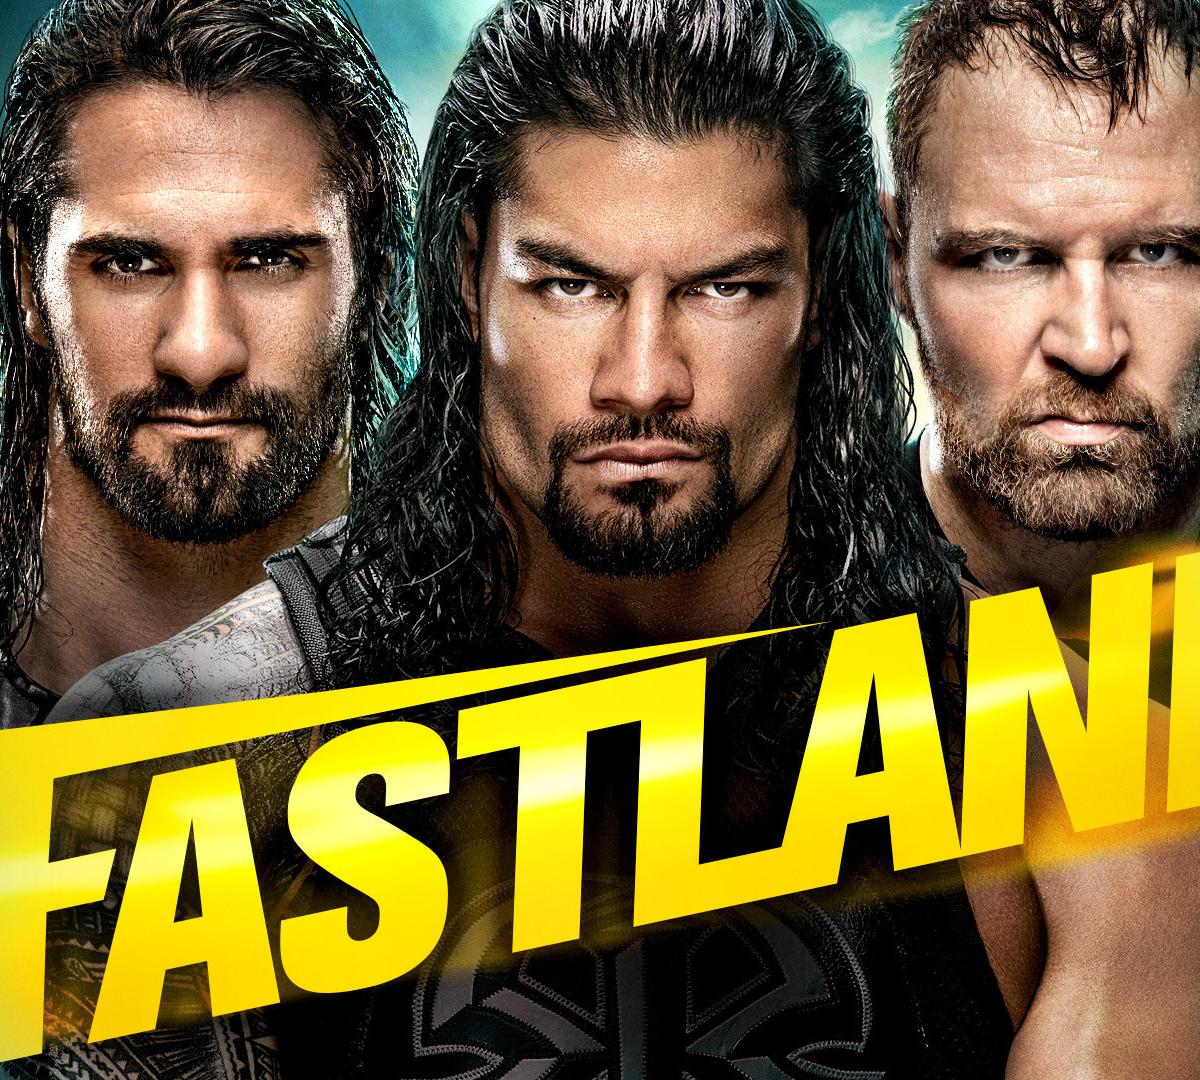 WWE Fastlane 2019 Results The Shield and Biggest Winners and Losers